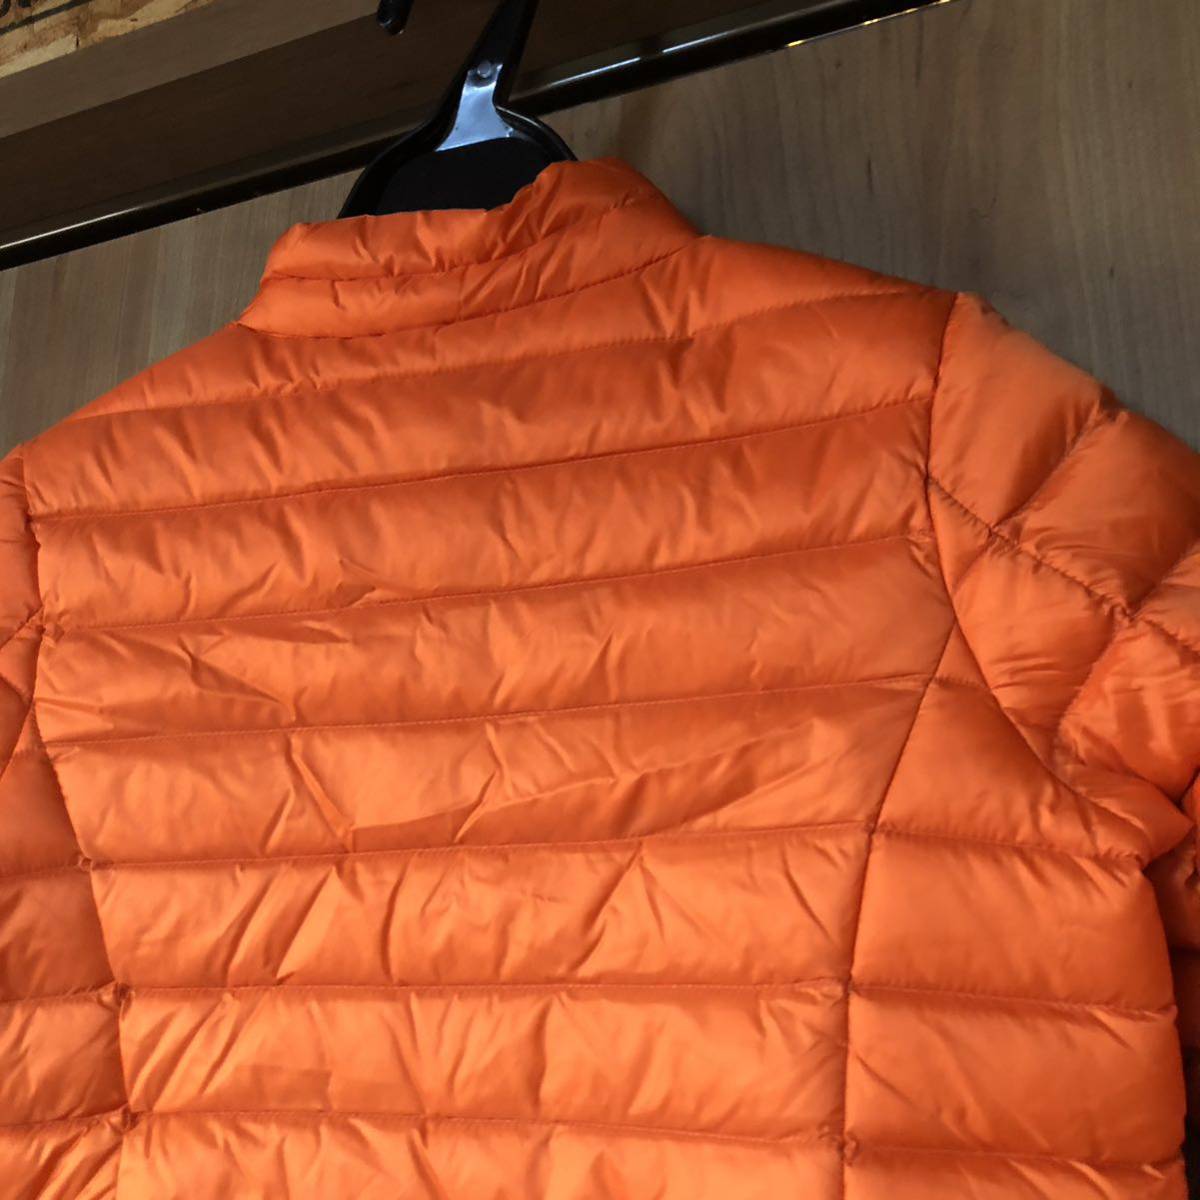  regular price 24000 jpy high quality outlet JOTT Kids for children down jacket cotton inside snowsuit man and woman use outer joto orange 4/6